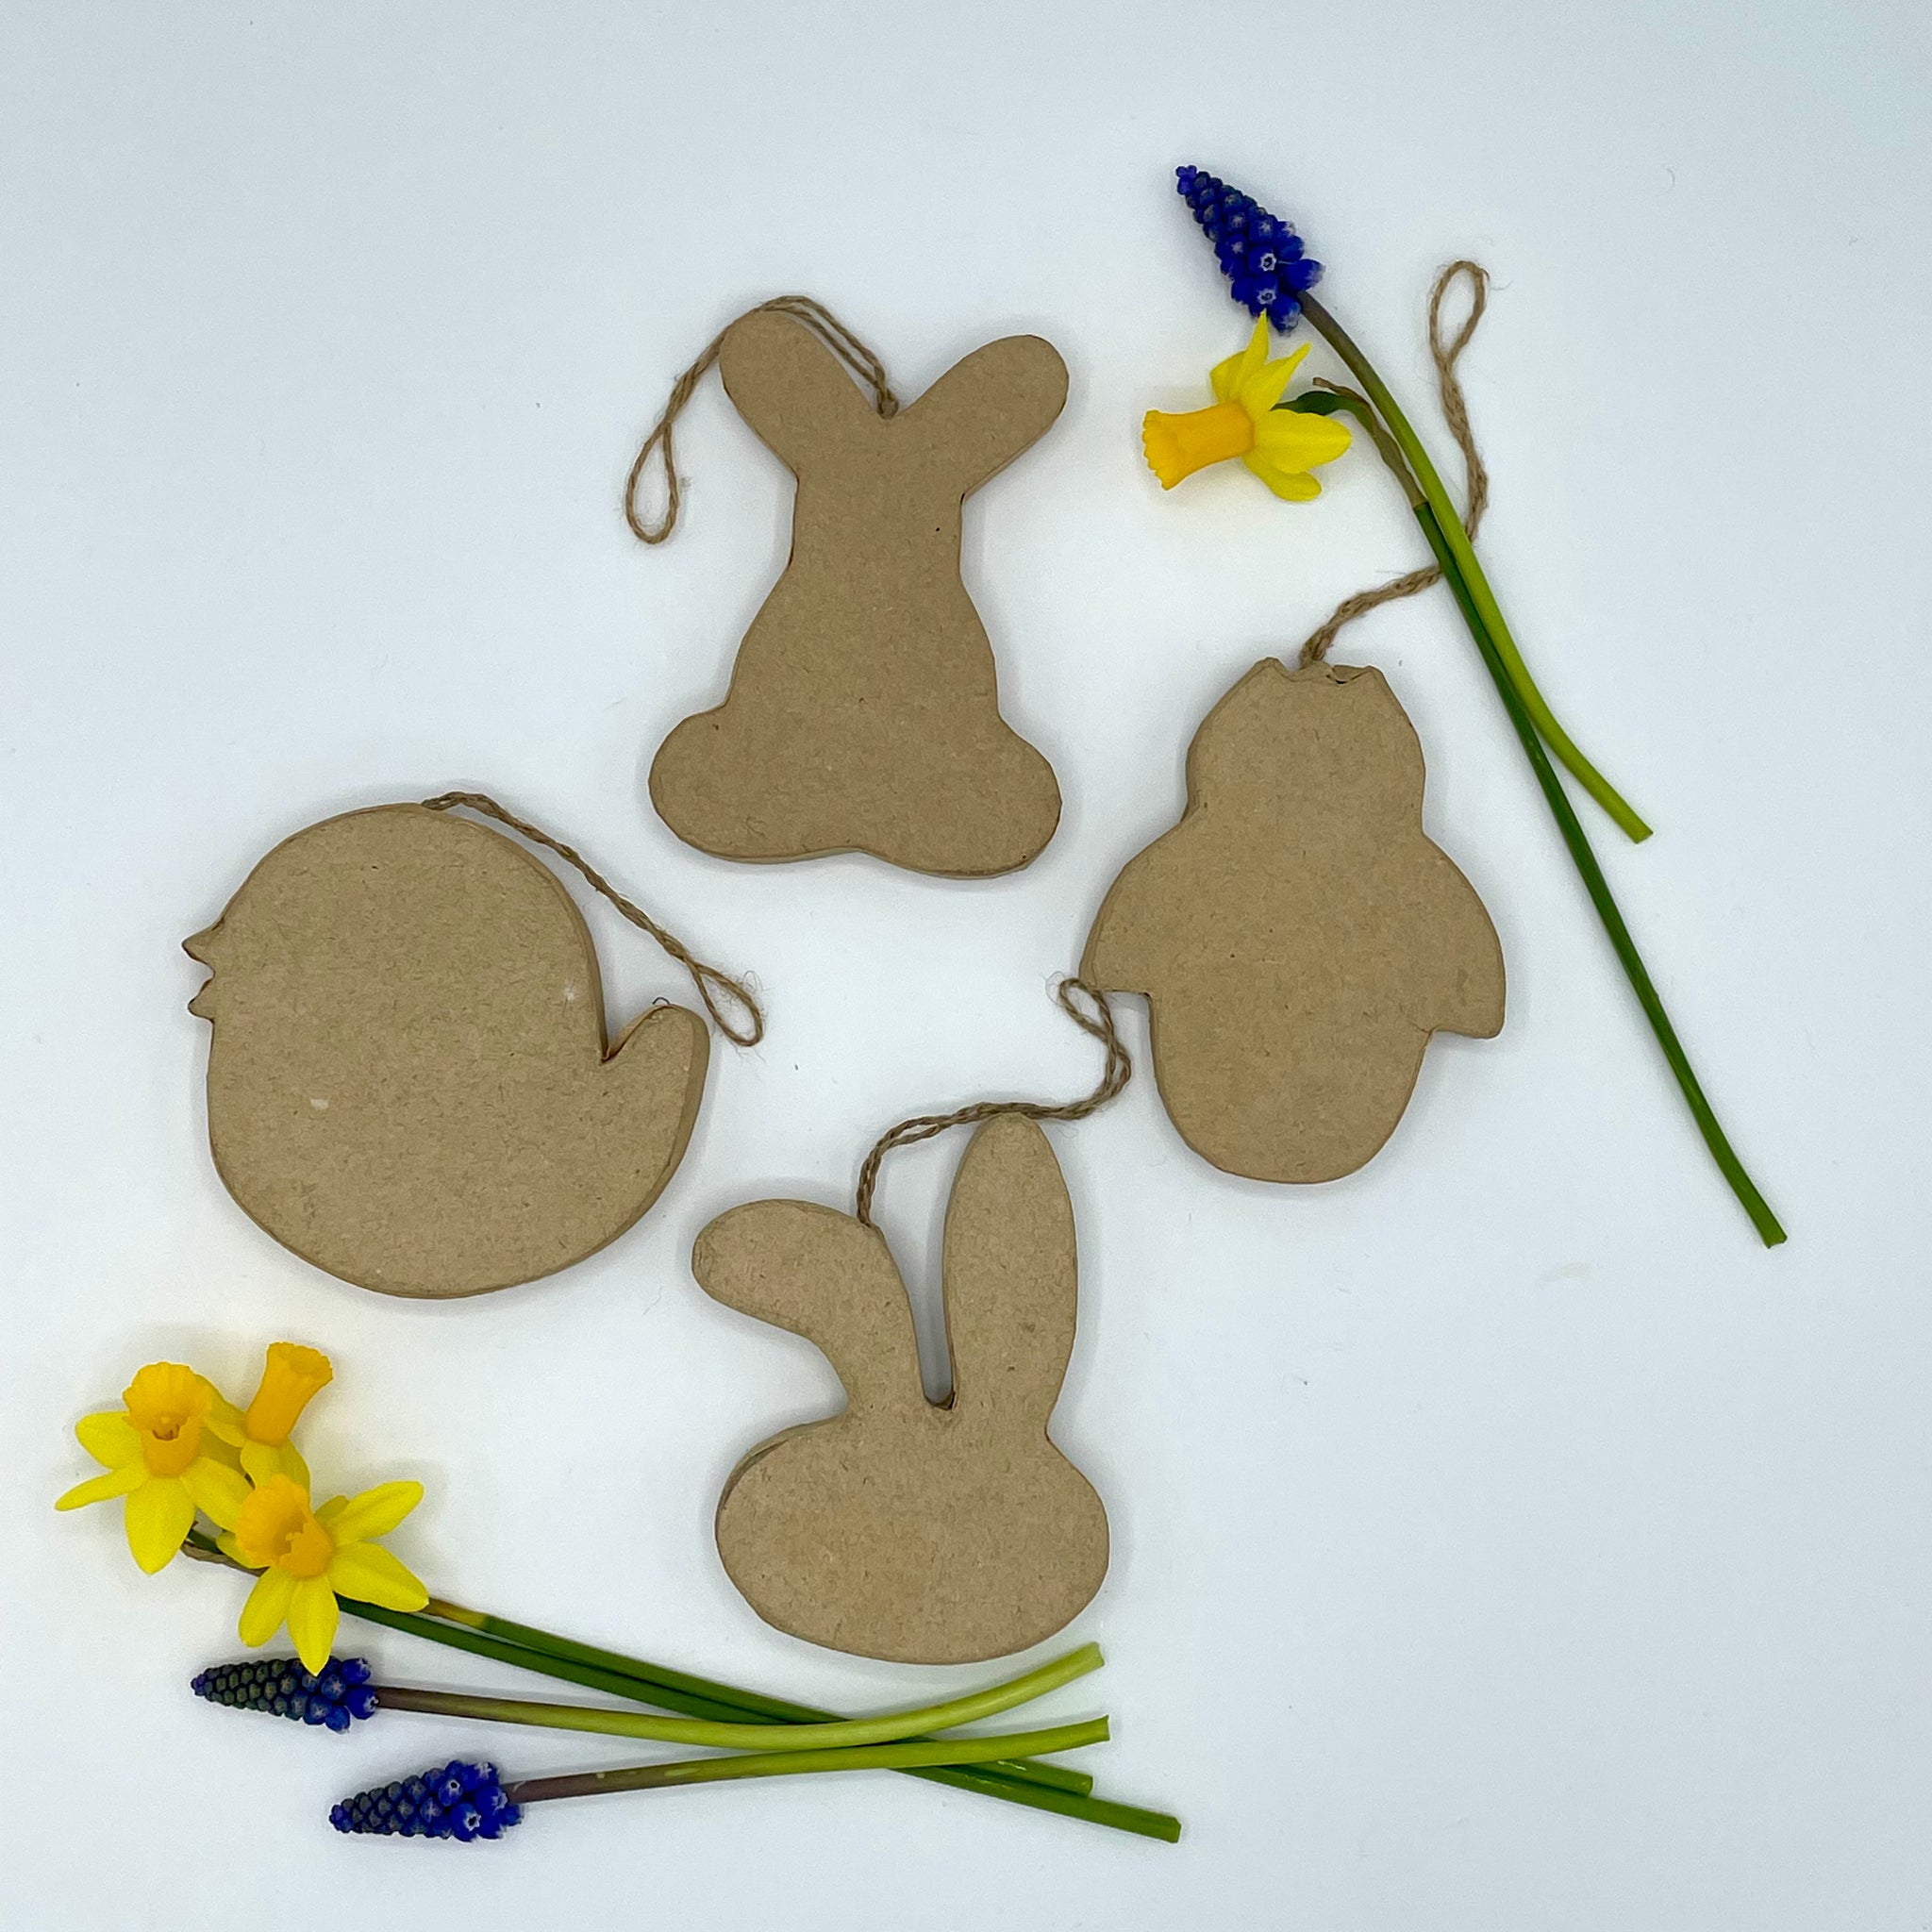 Make your own Plastic-Free Easter Decorations